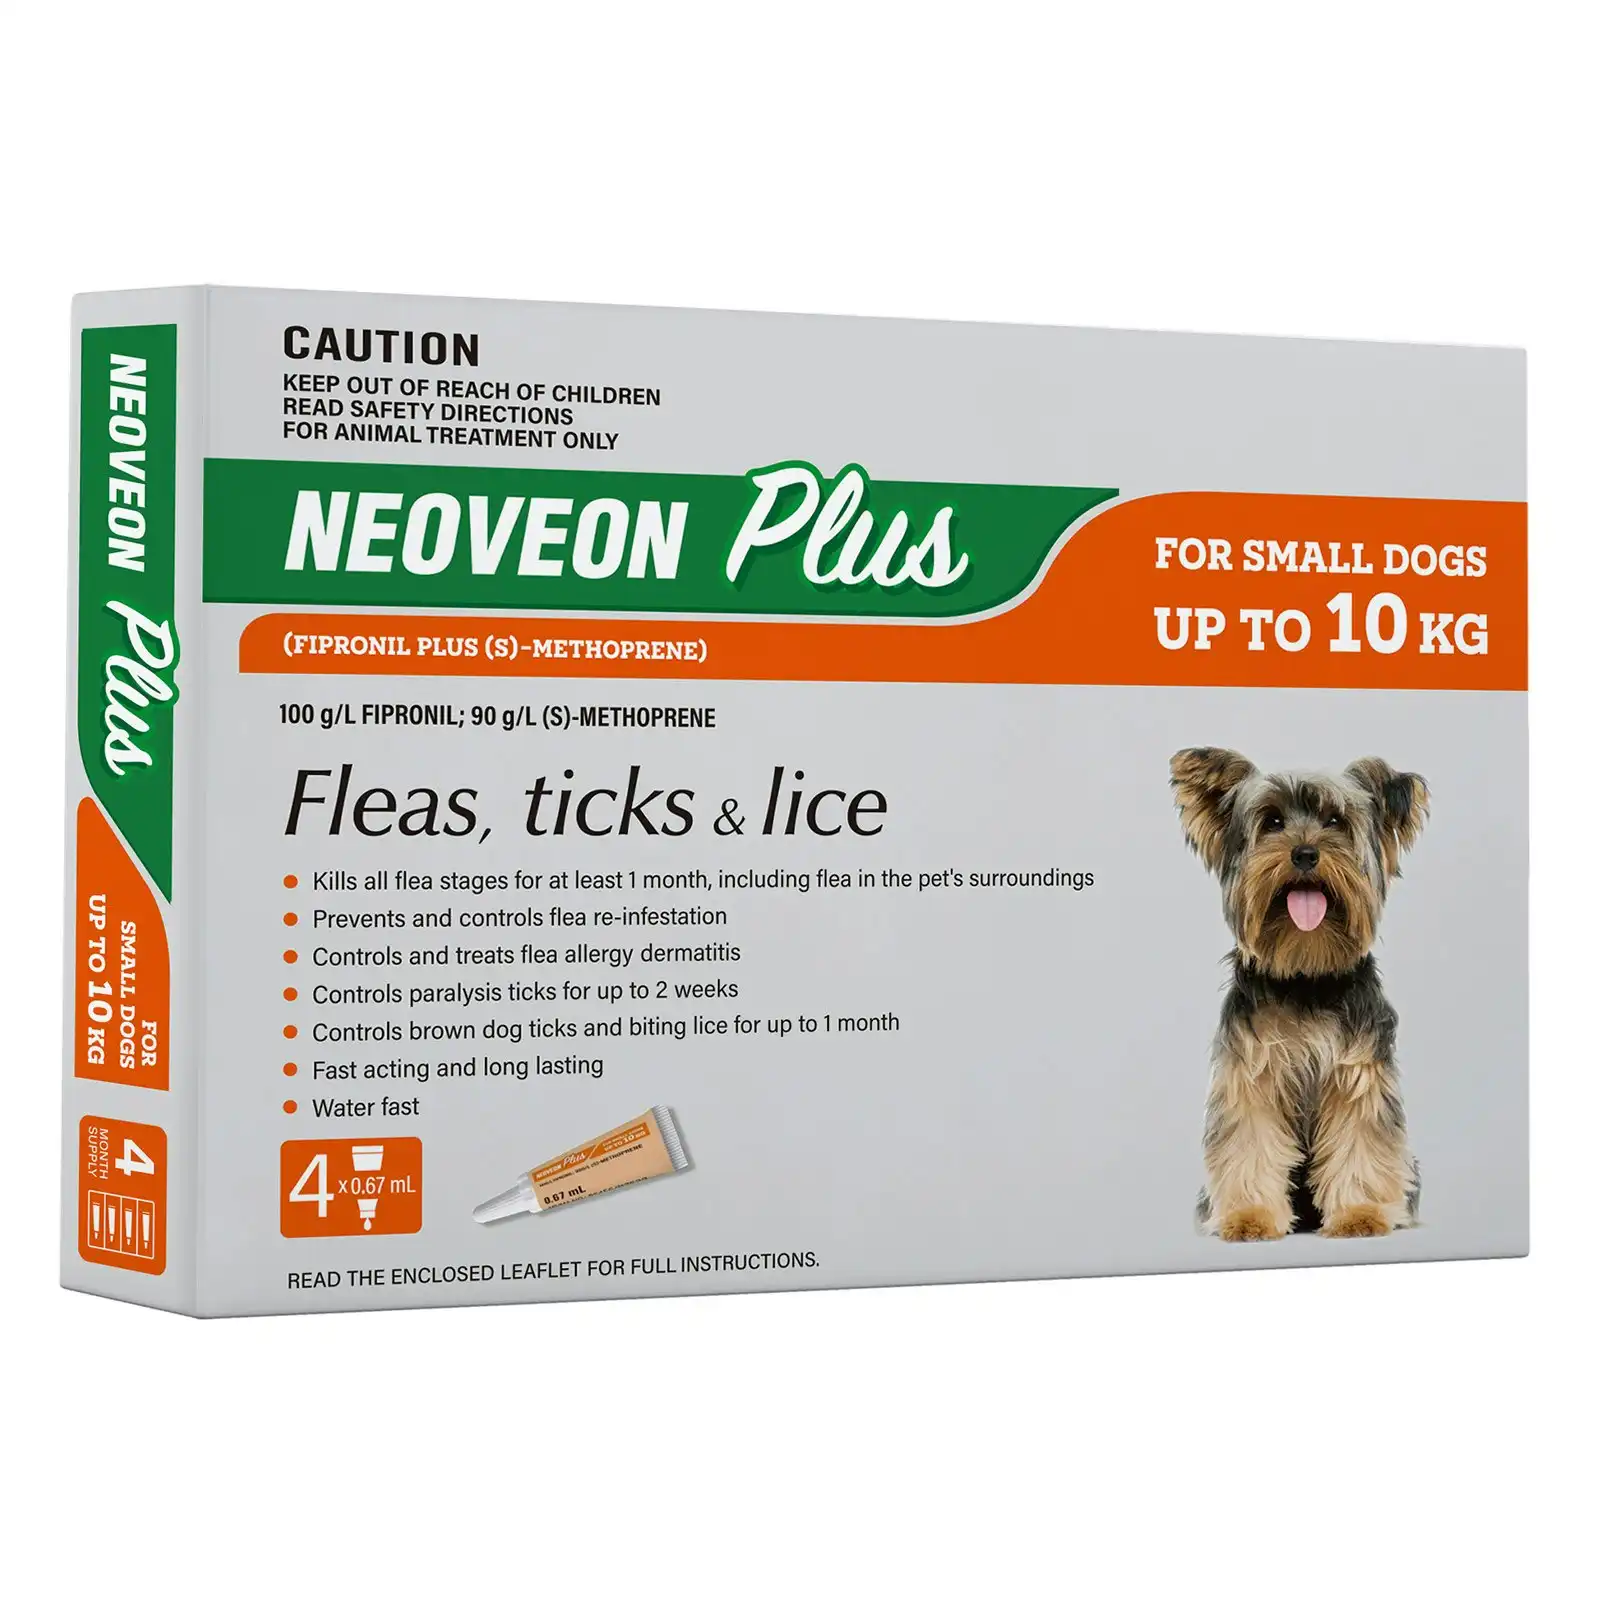 Neoveon Plus For Small Dogs Up to 10 Kg (ORANGE) 4 Pipettes